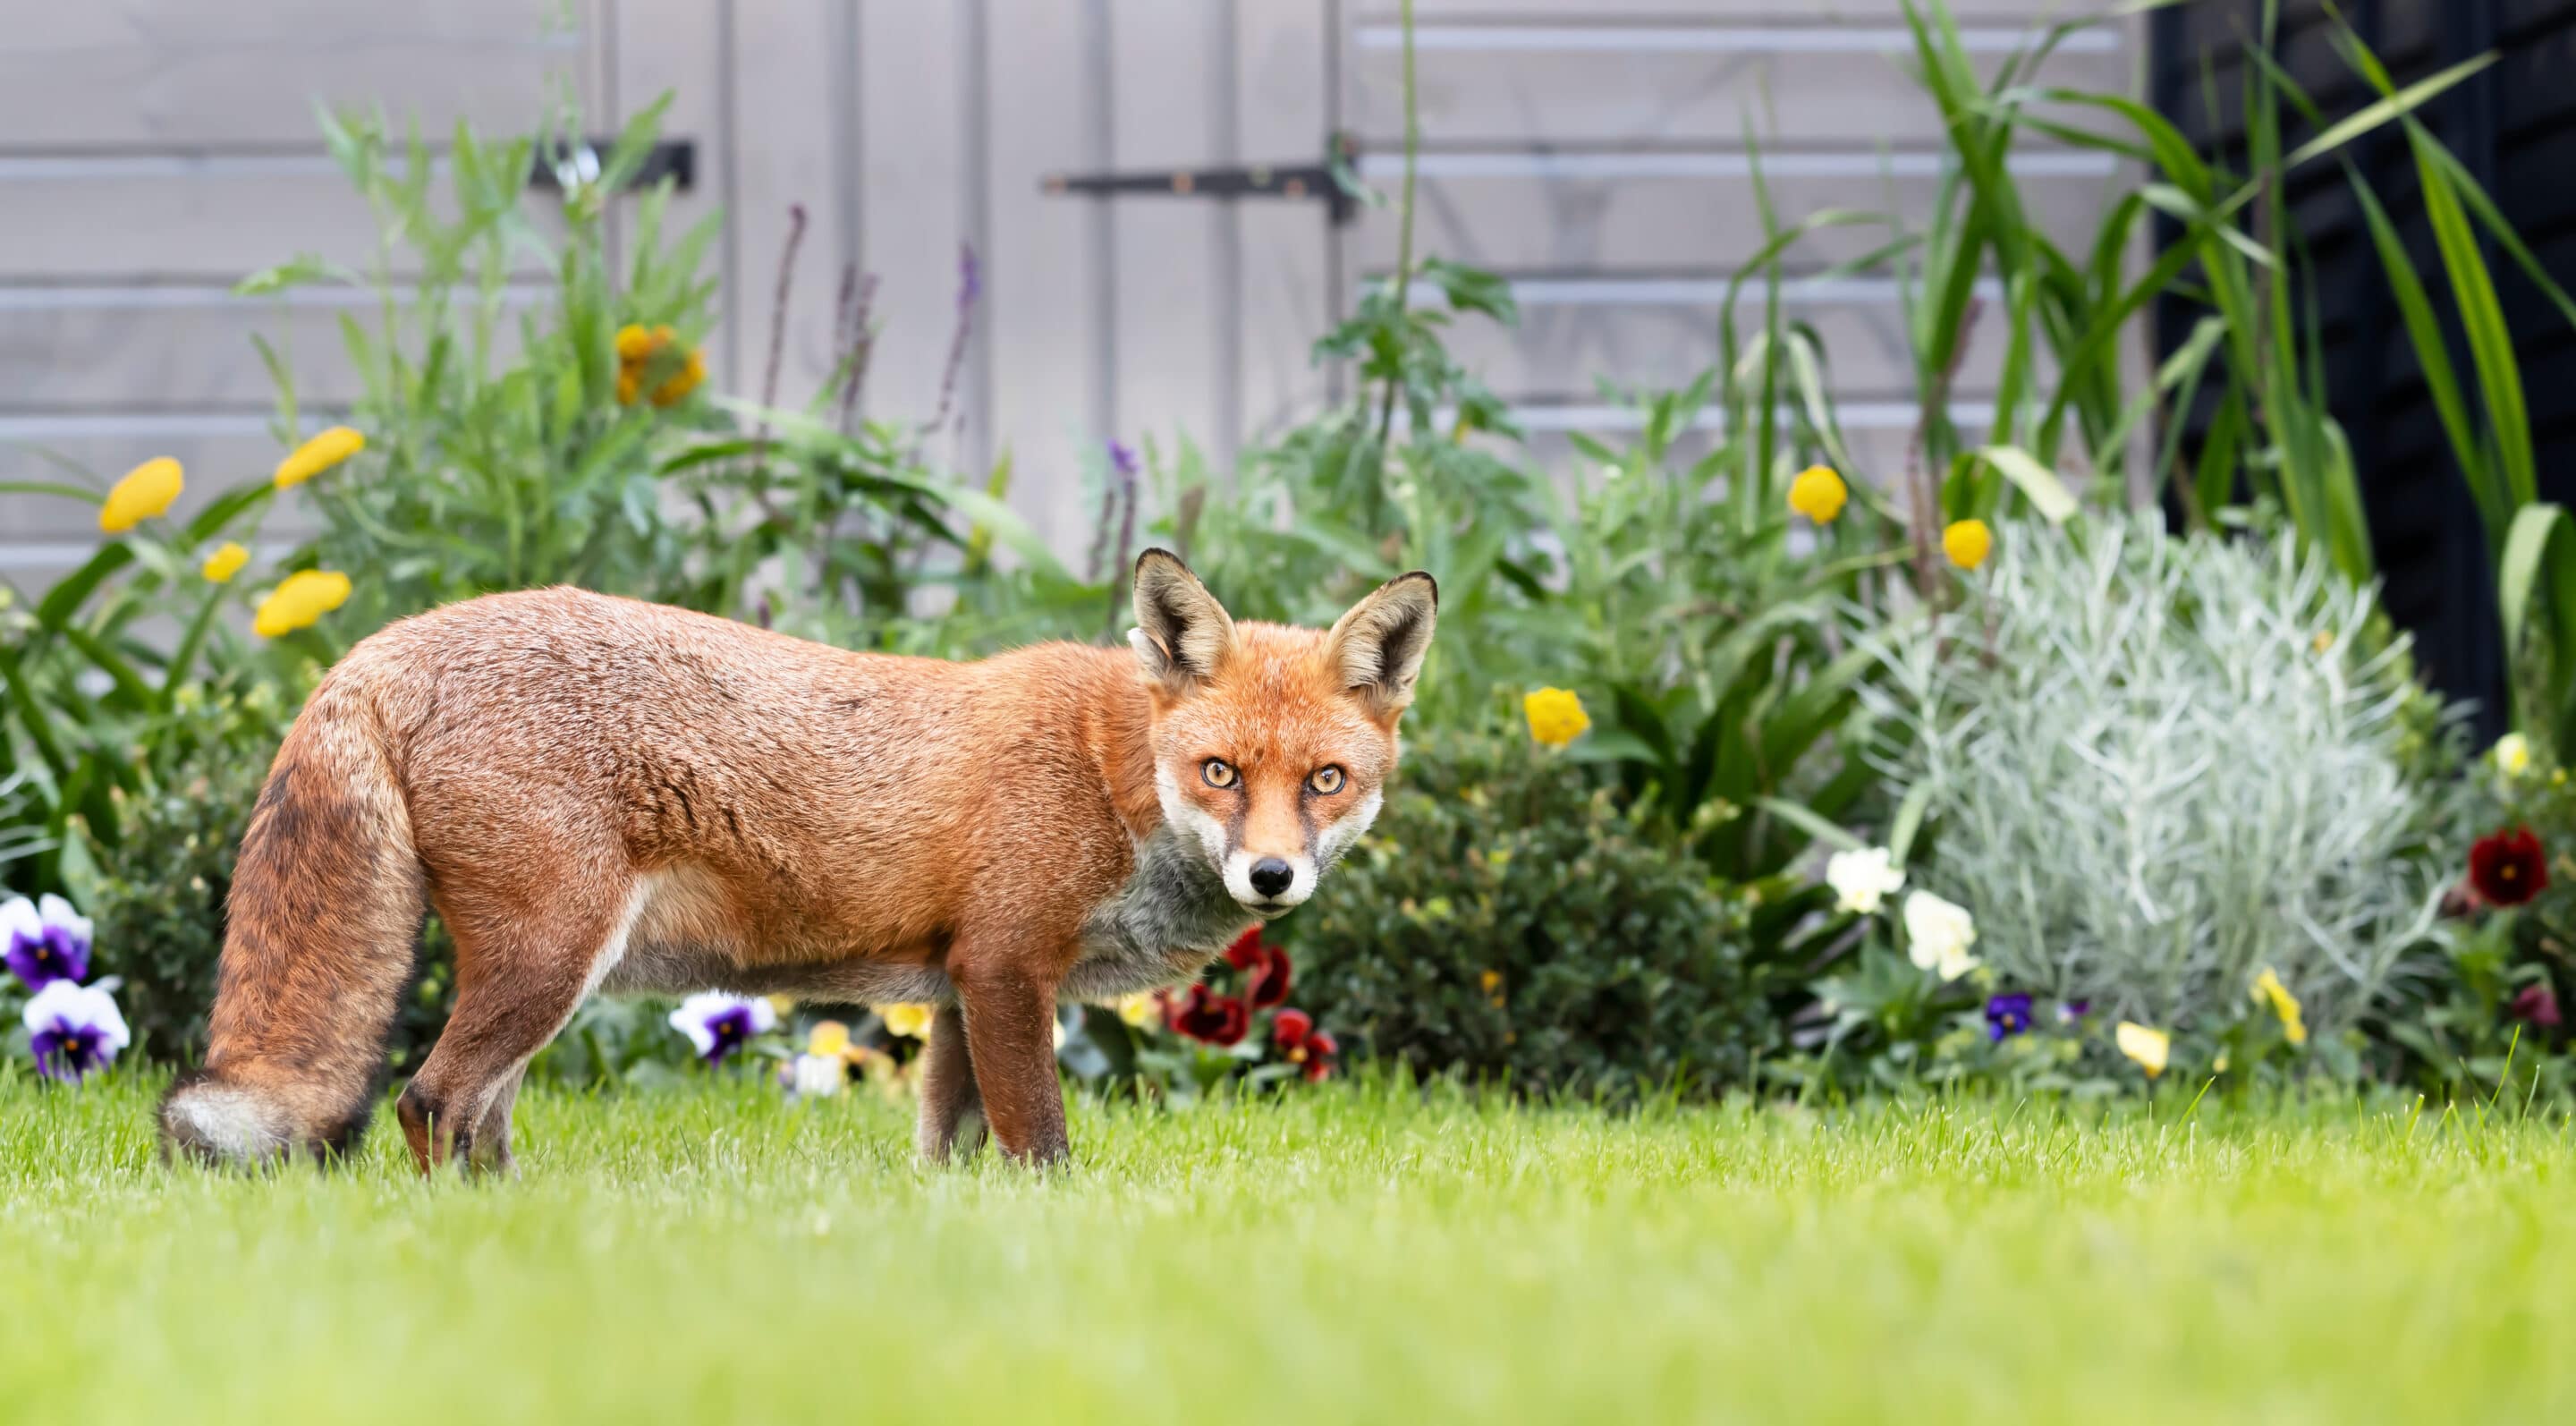 Fox stood by flowers in garden staring at camera